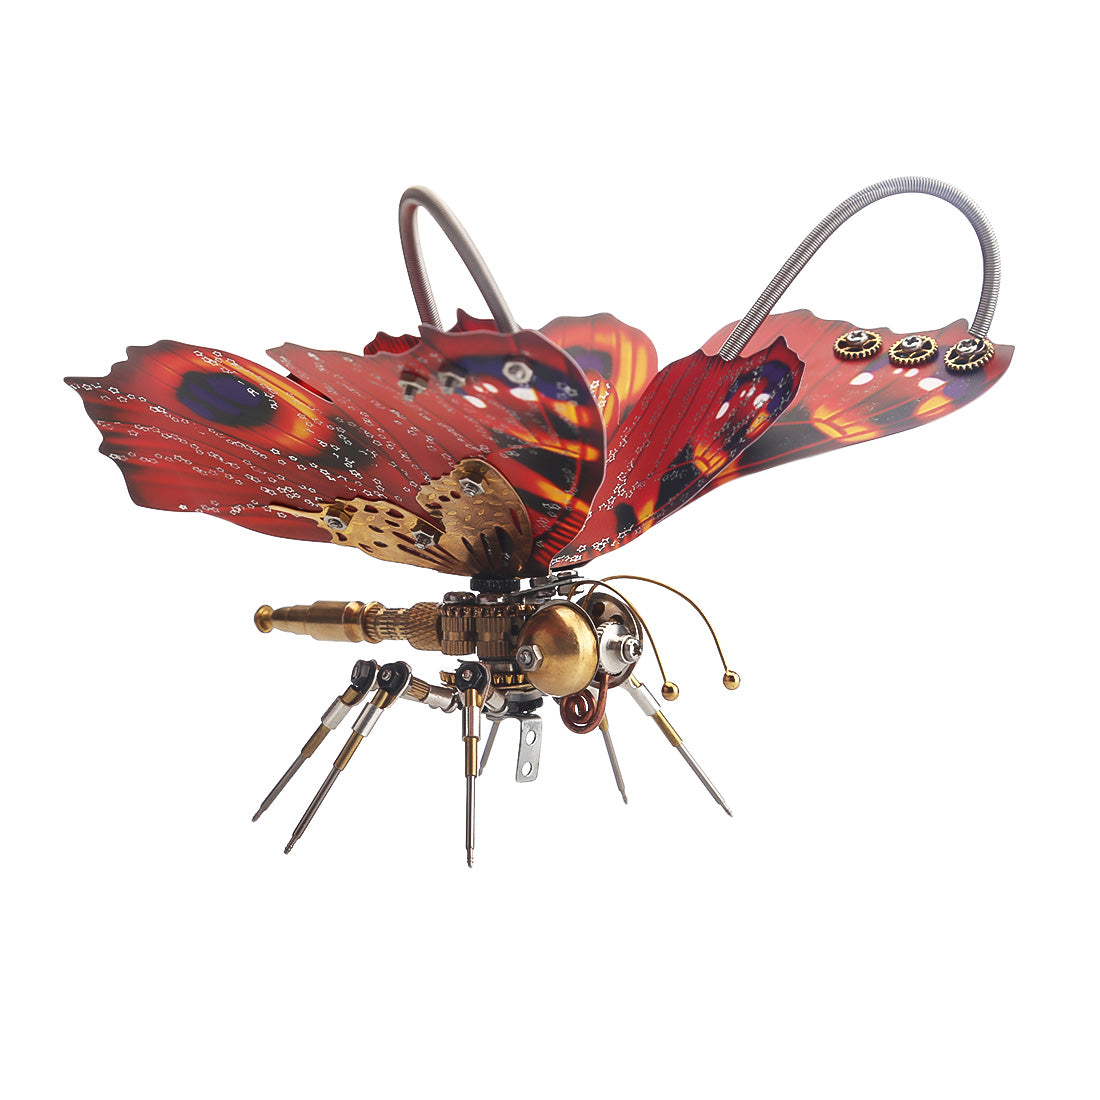 Steampunk 3D Orange-red Peacock Butterfly Model Assembly Kit With Flower Base